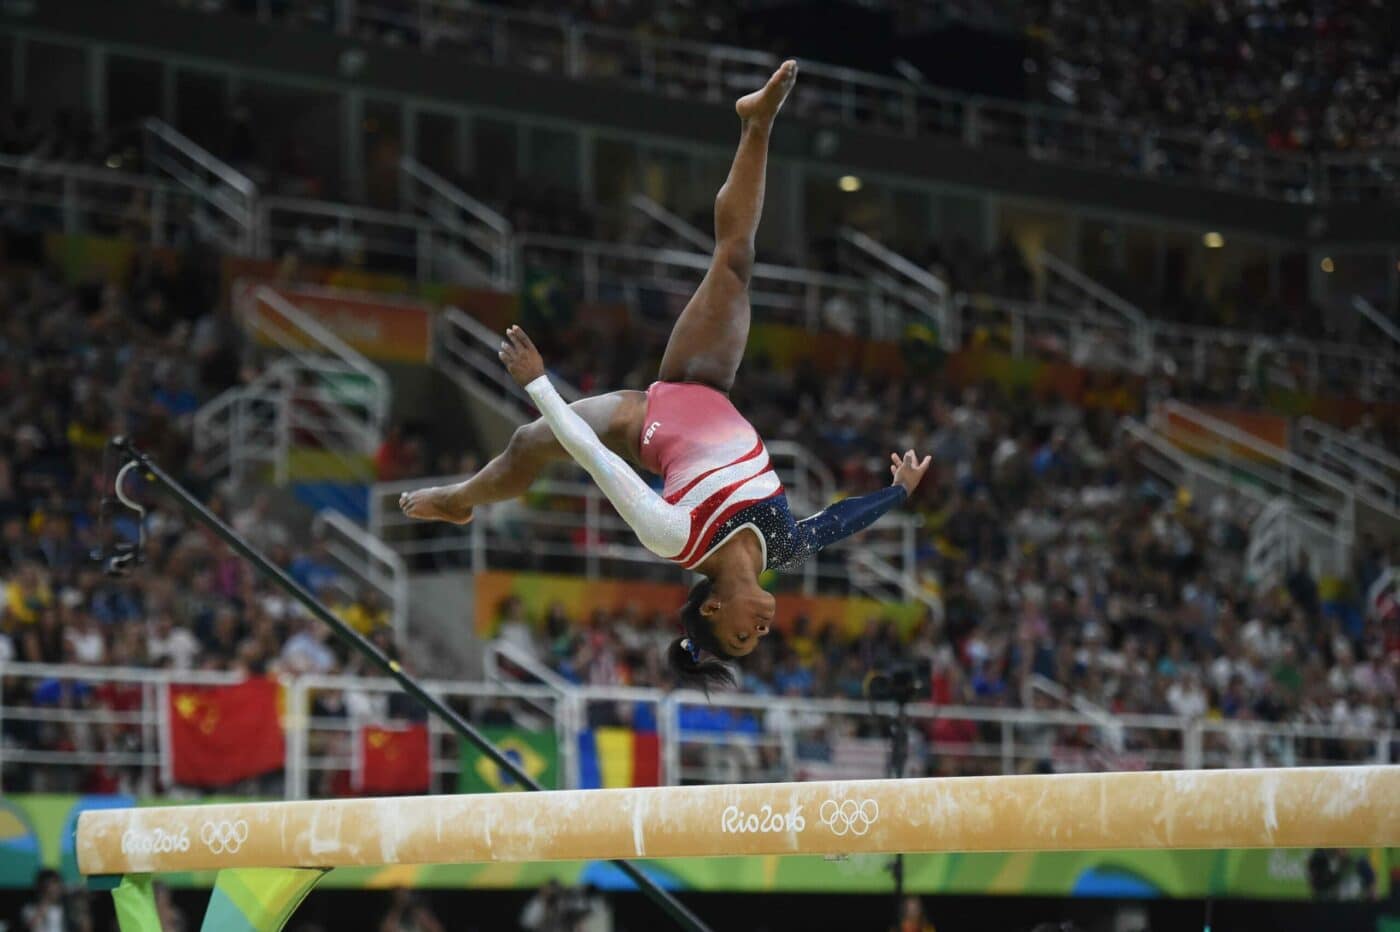 Simone biles the greatest gymnast of all time